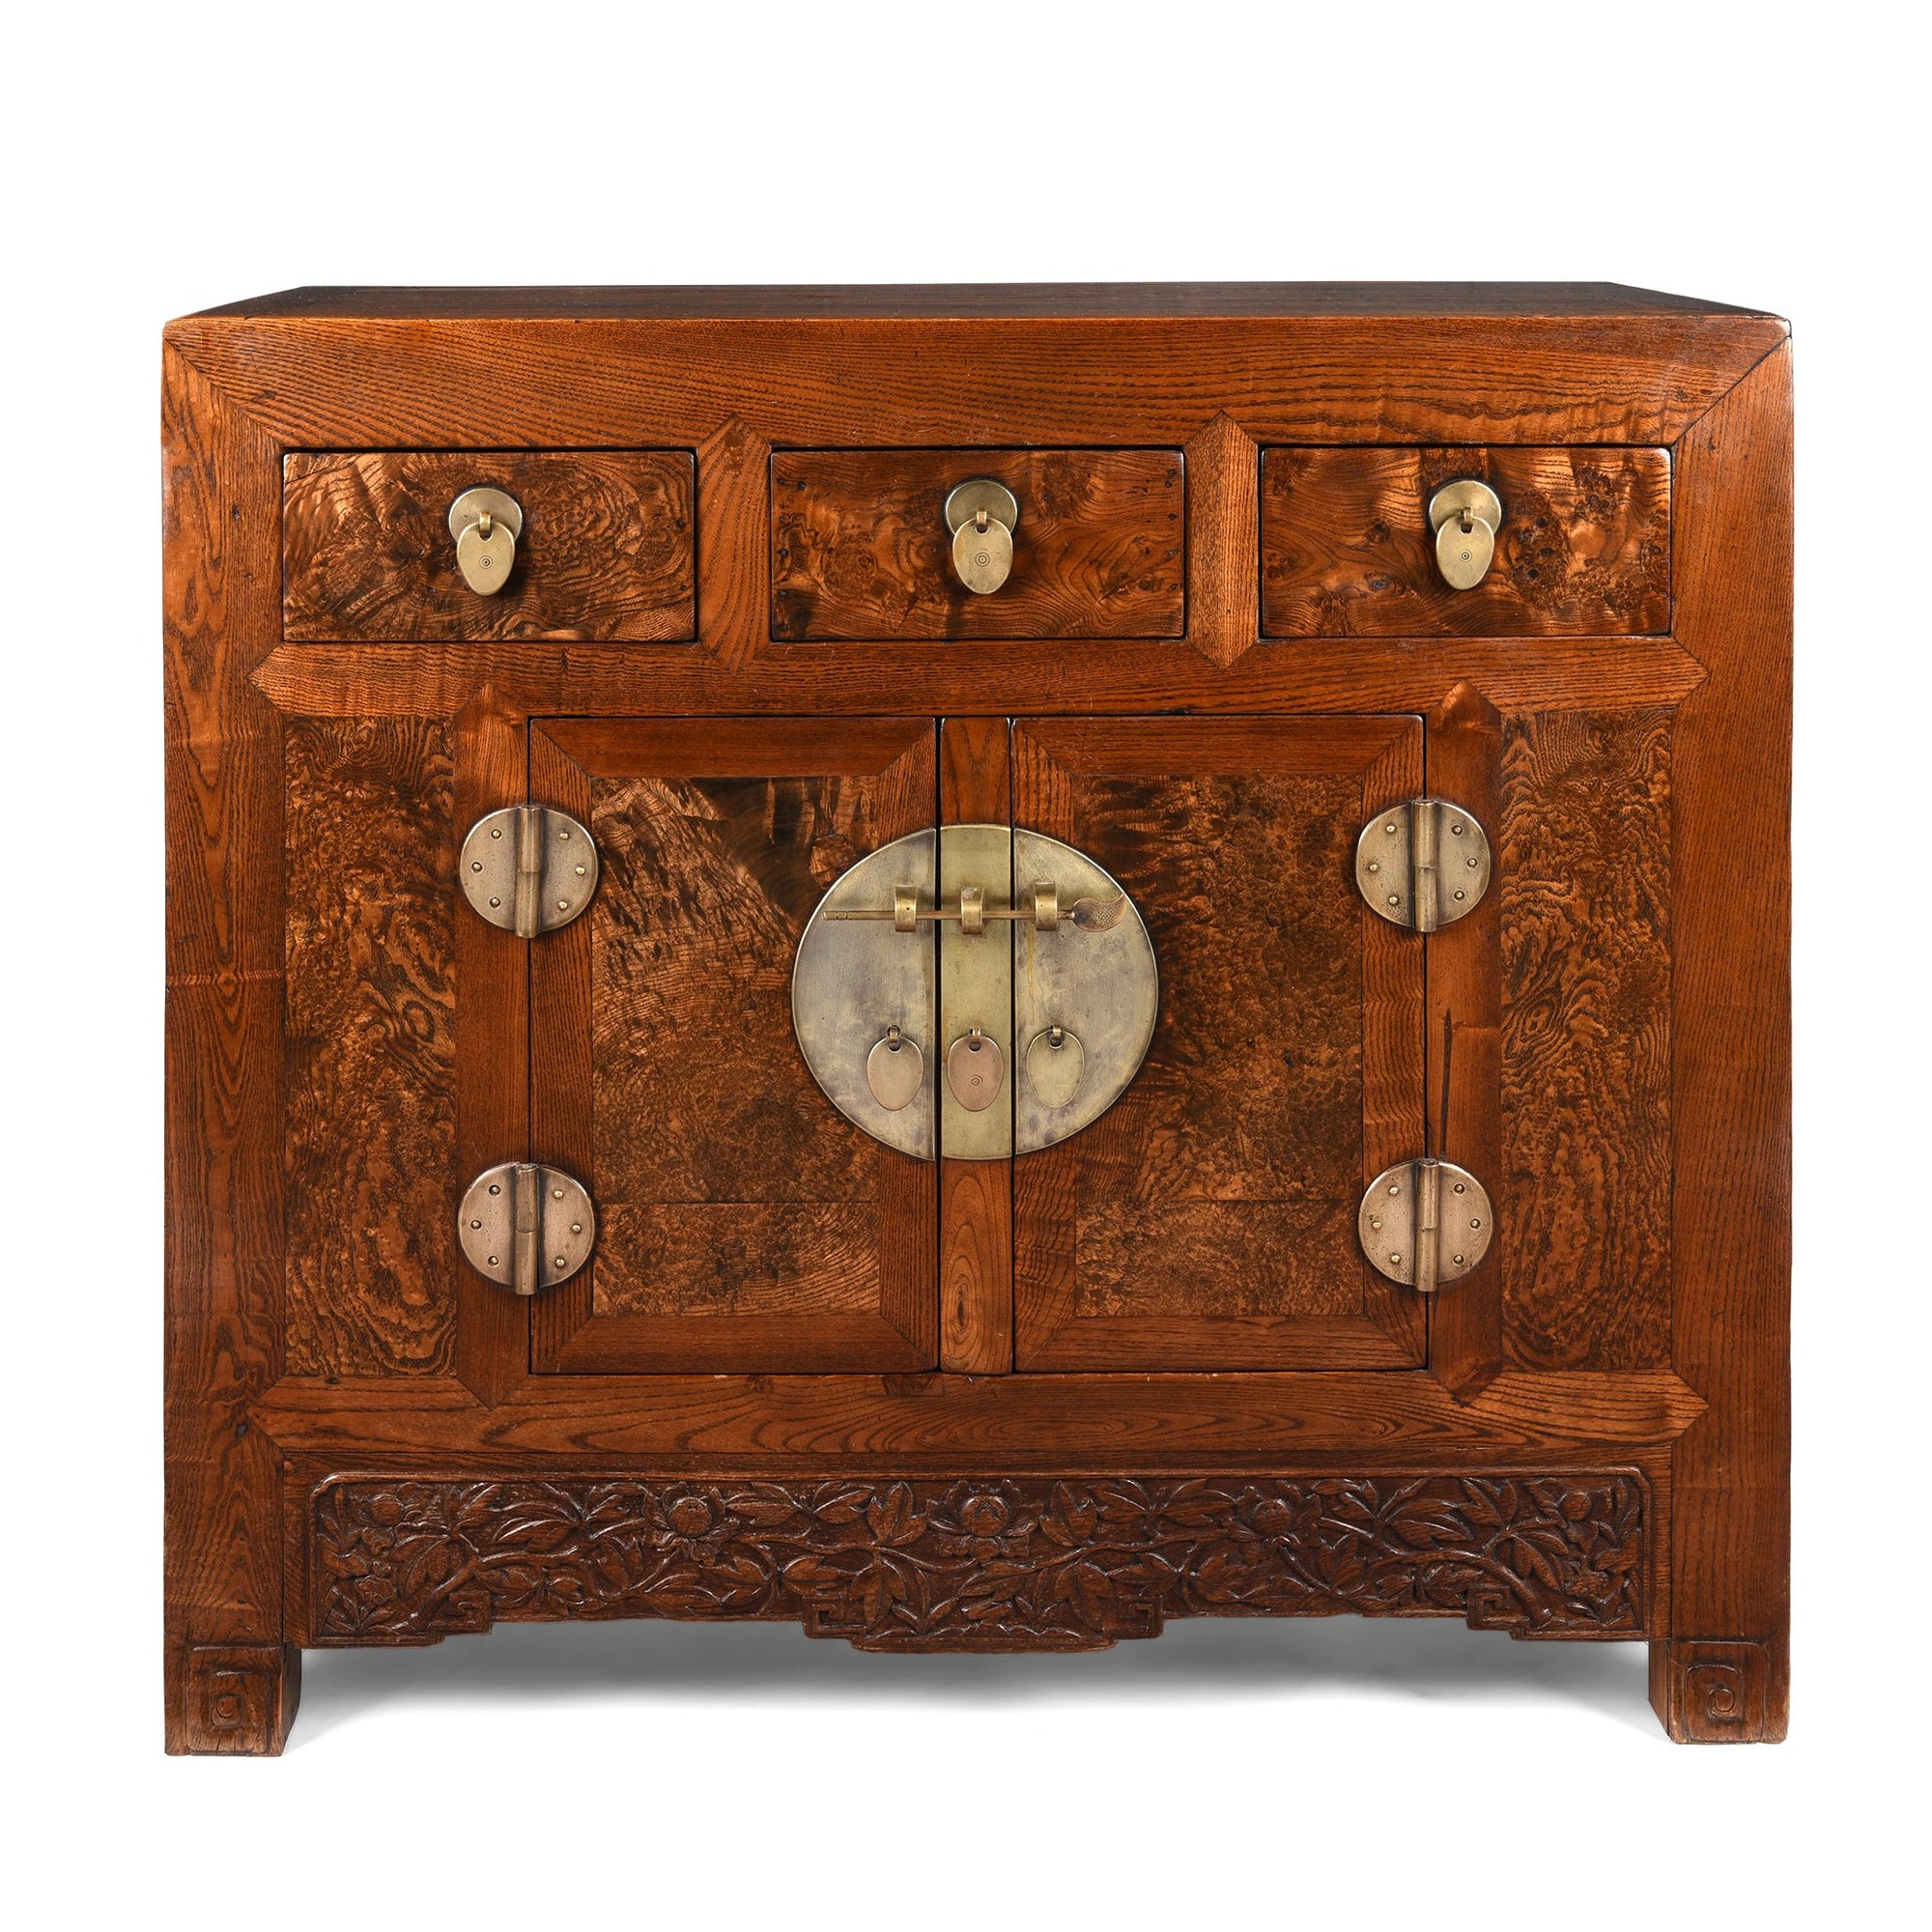 Burr Elm Sideboard From Tianjin - 19thC - 100 x 51 x 93 (WxDxH cms) - M405